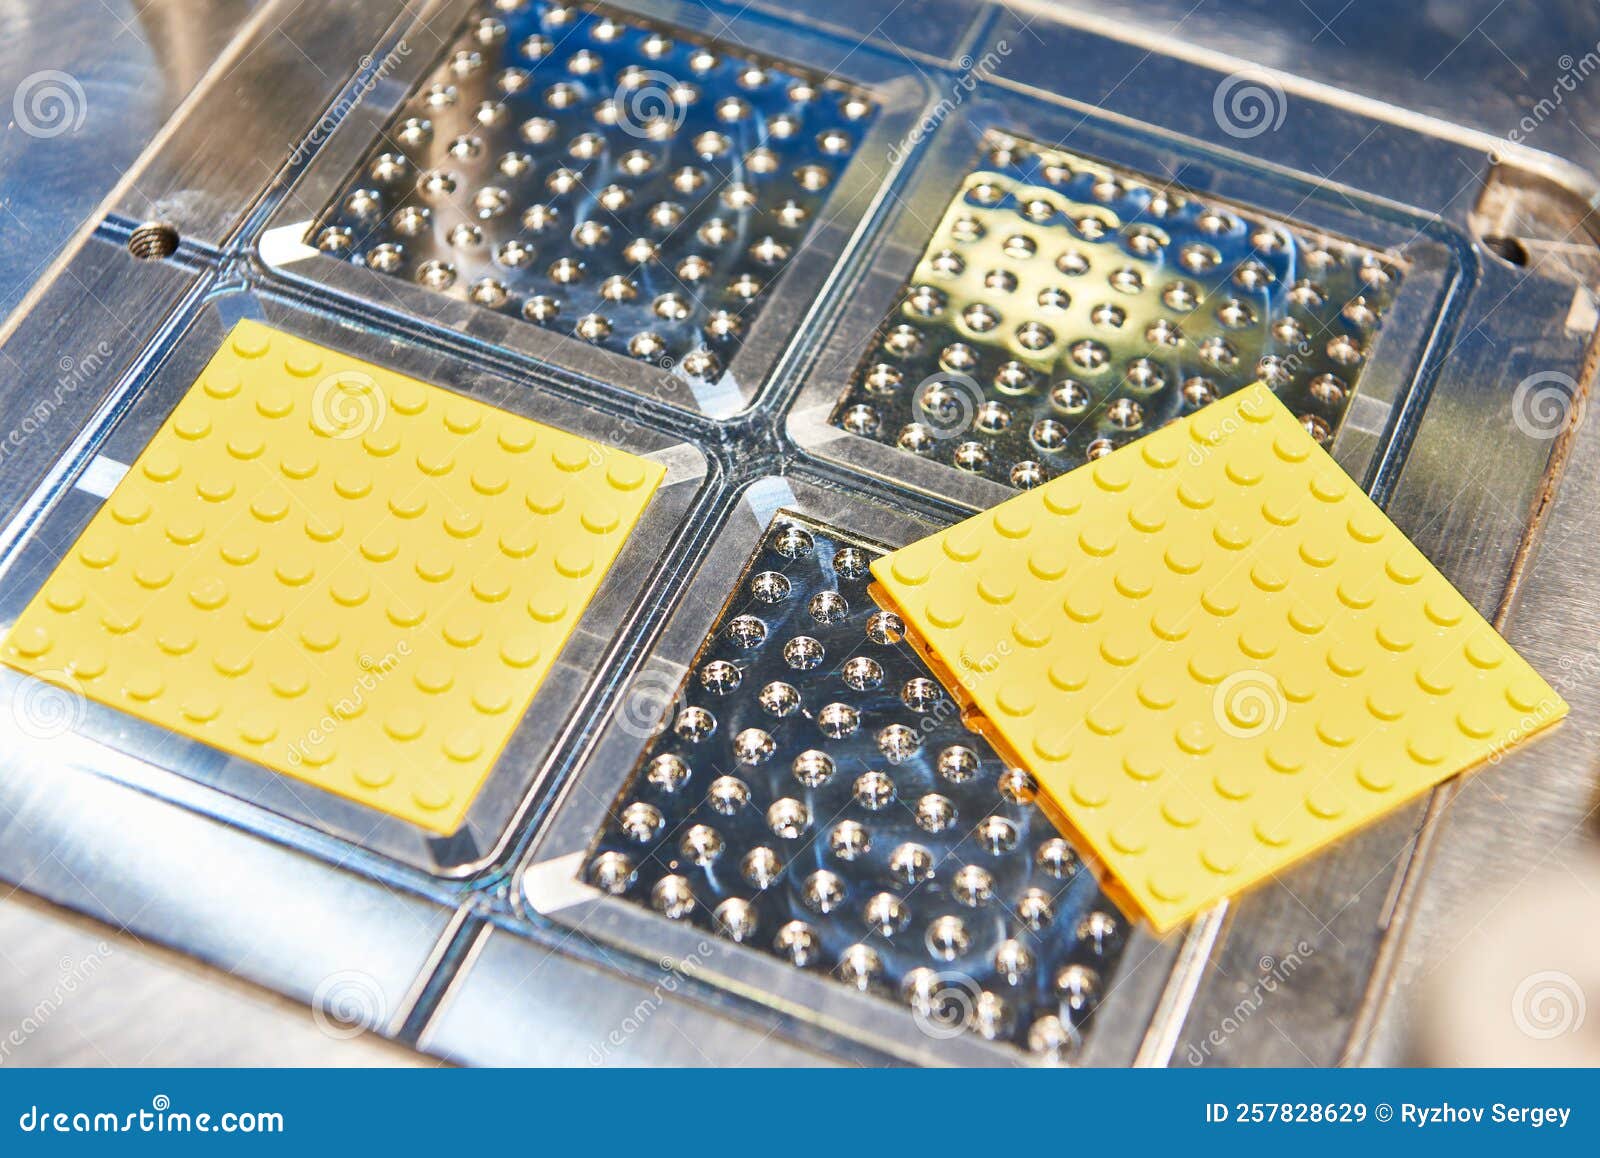 Metal Molds for Plastic Parts Industrial Stock Image - Image of